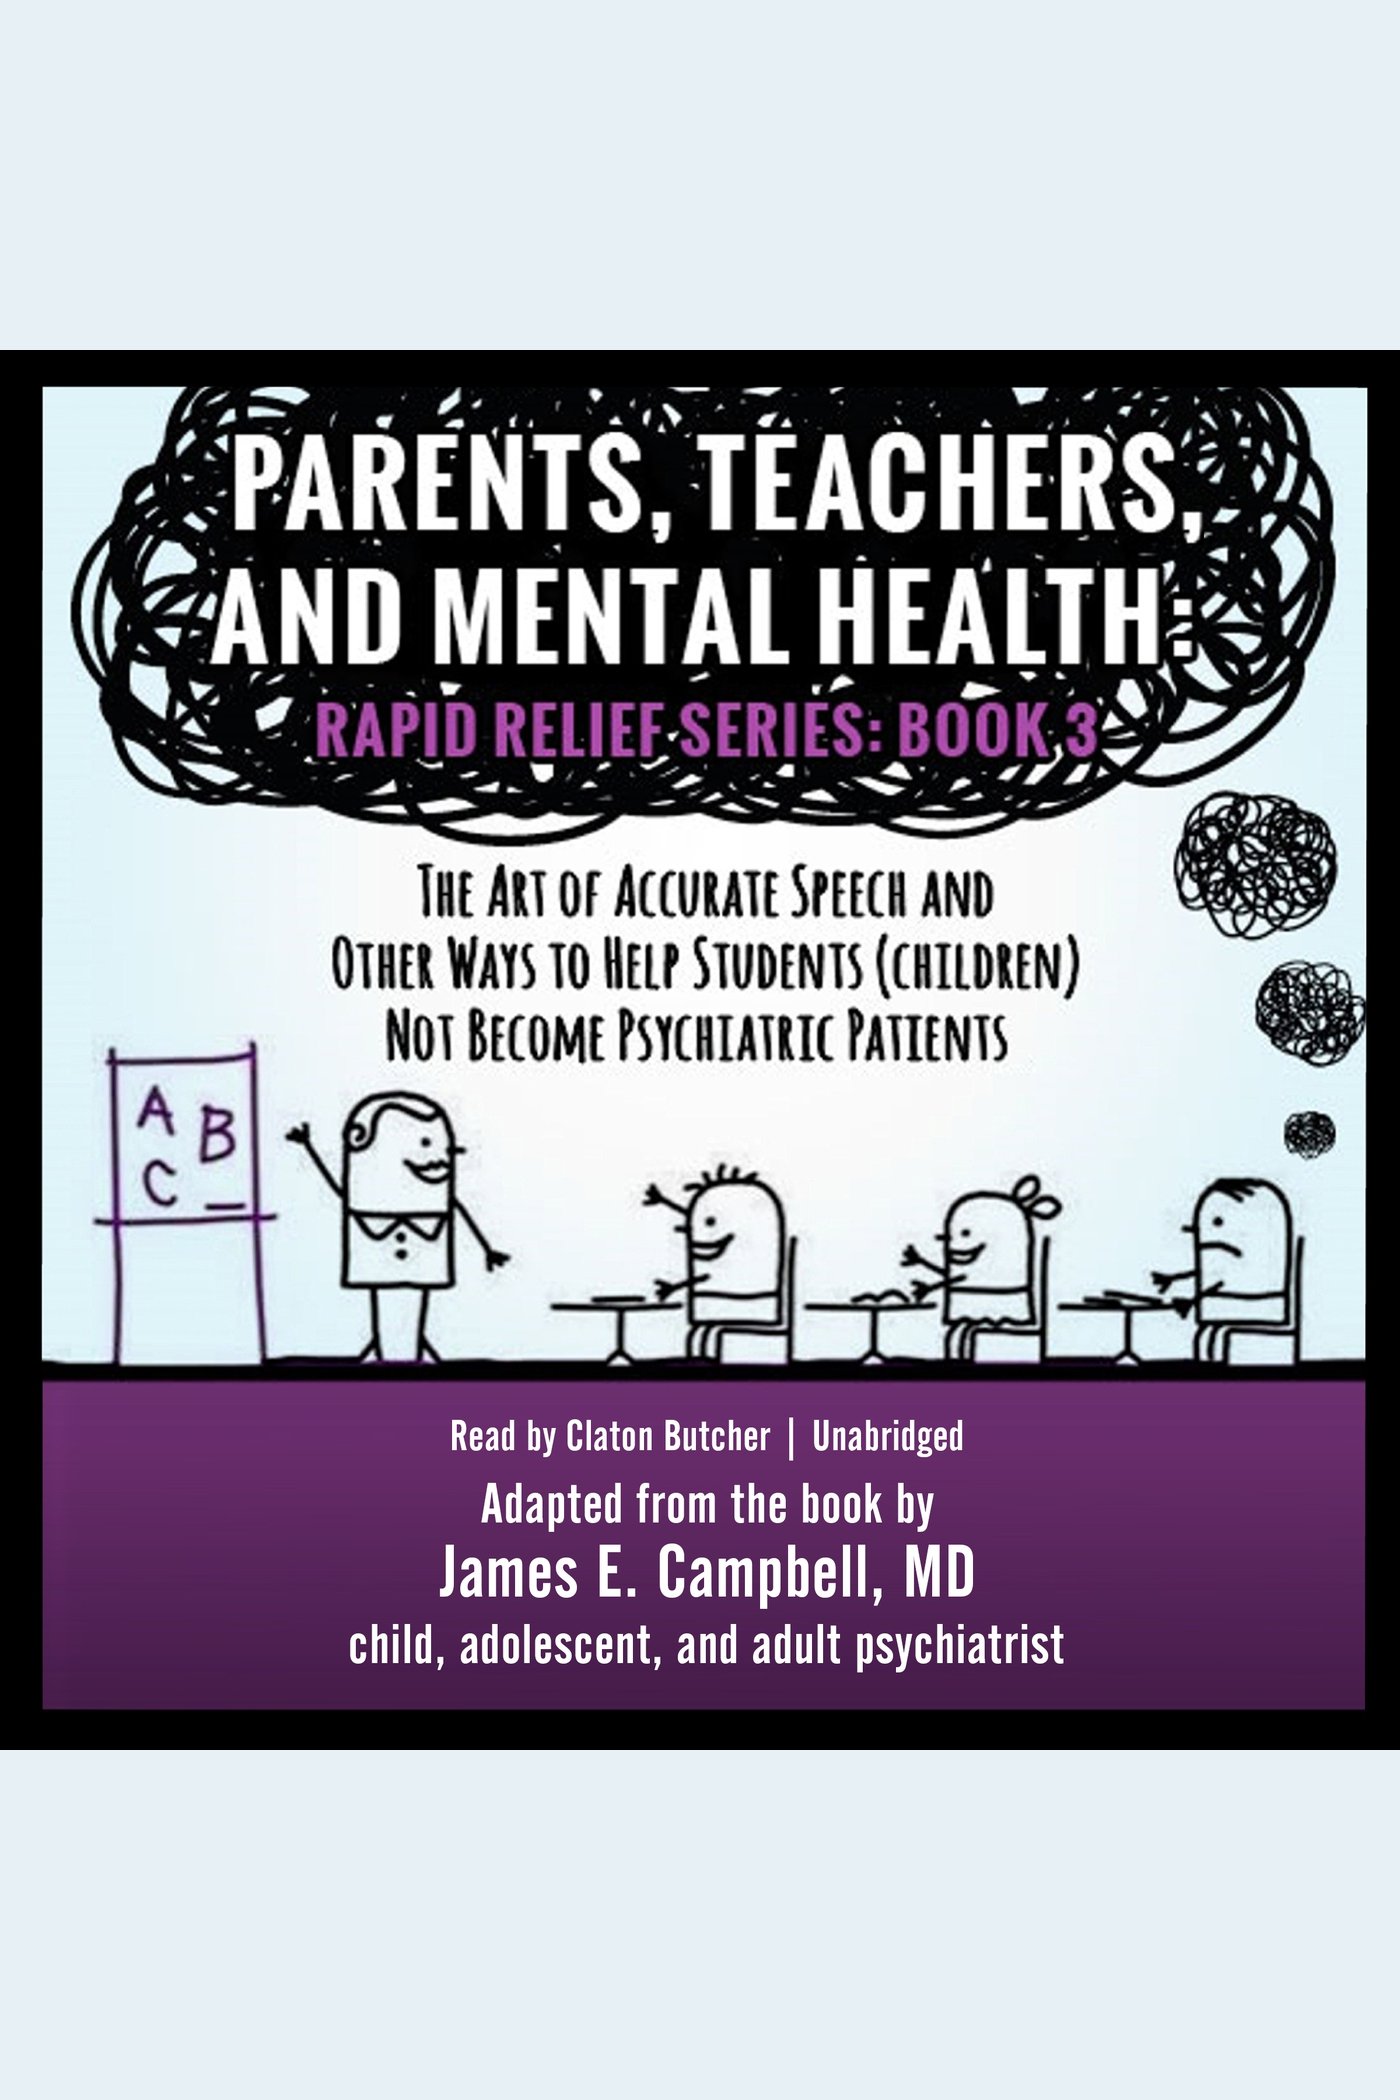 Parents, Teachers, and Mental Health The Art of Accurate Speech and Other Ways to Help Students (Children) Not Become Psychiatric Patients cover image